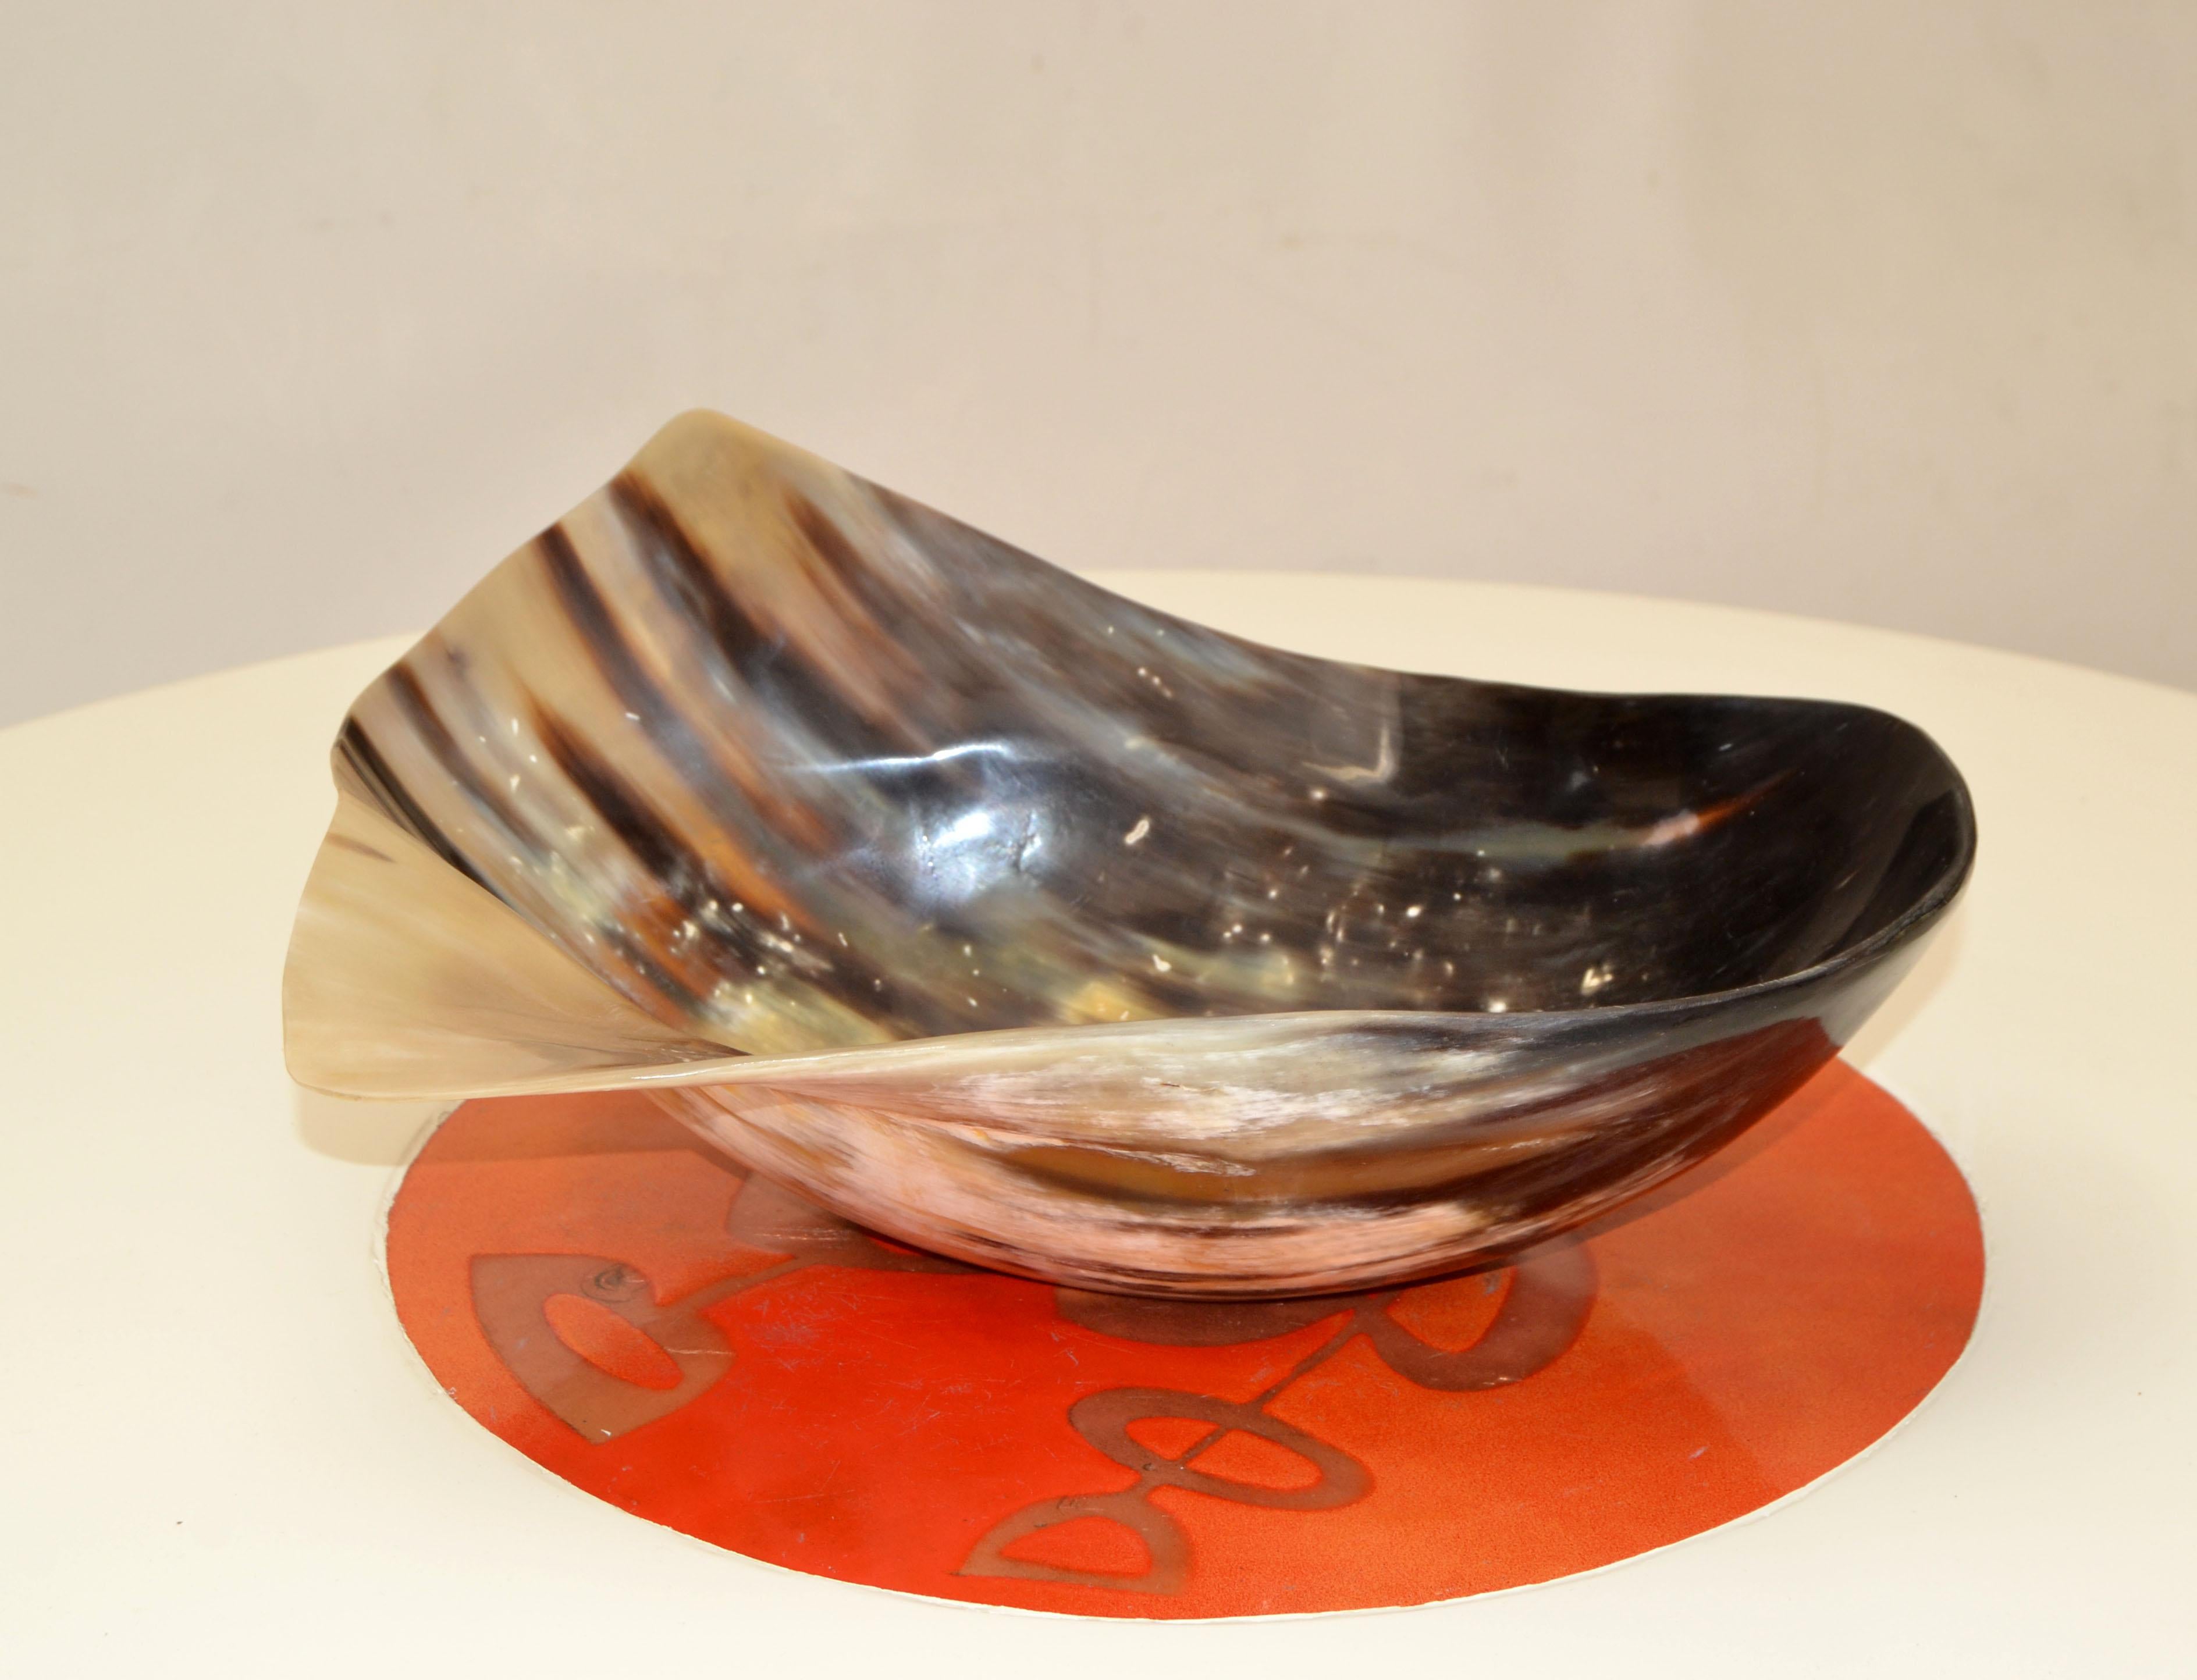 American Polished Handmade Horn Bowl, Catchall, Vessel, Centerpiece Mid-Century Modern For Sale